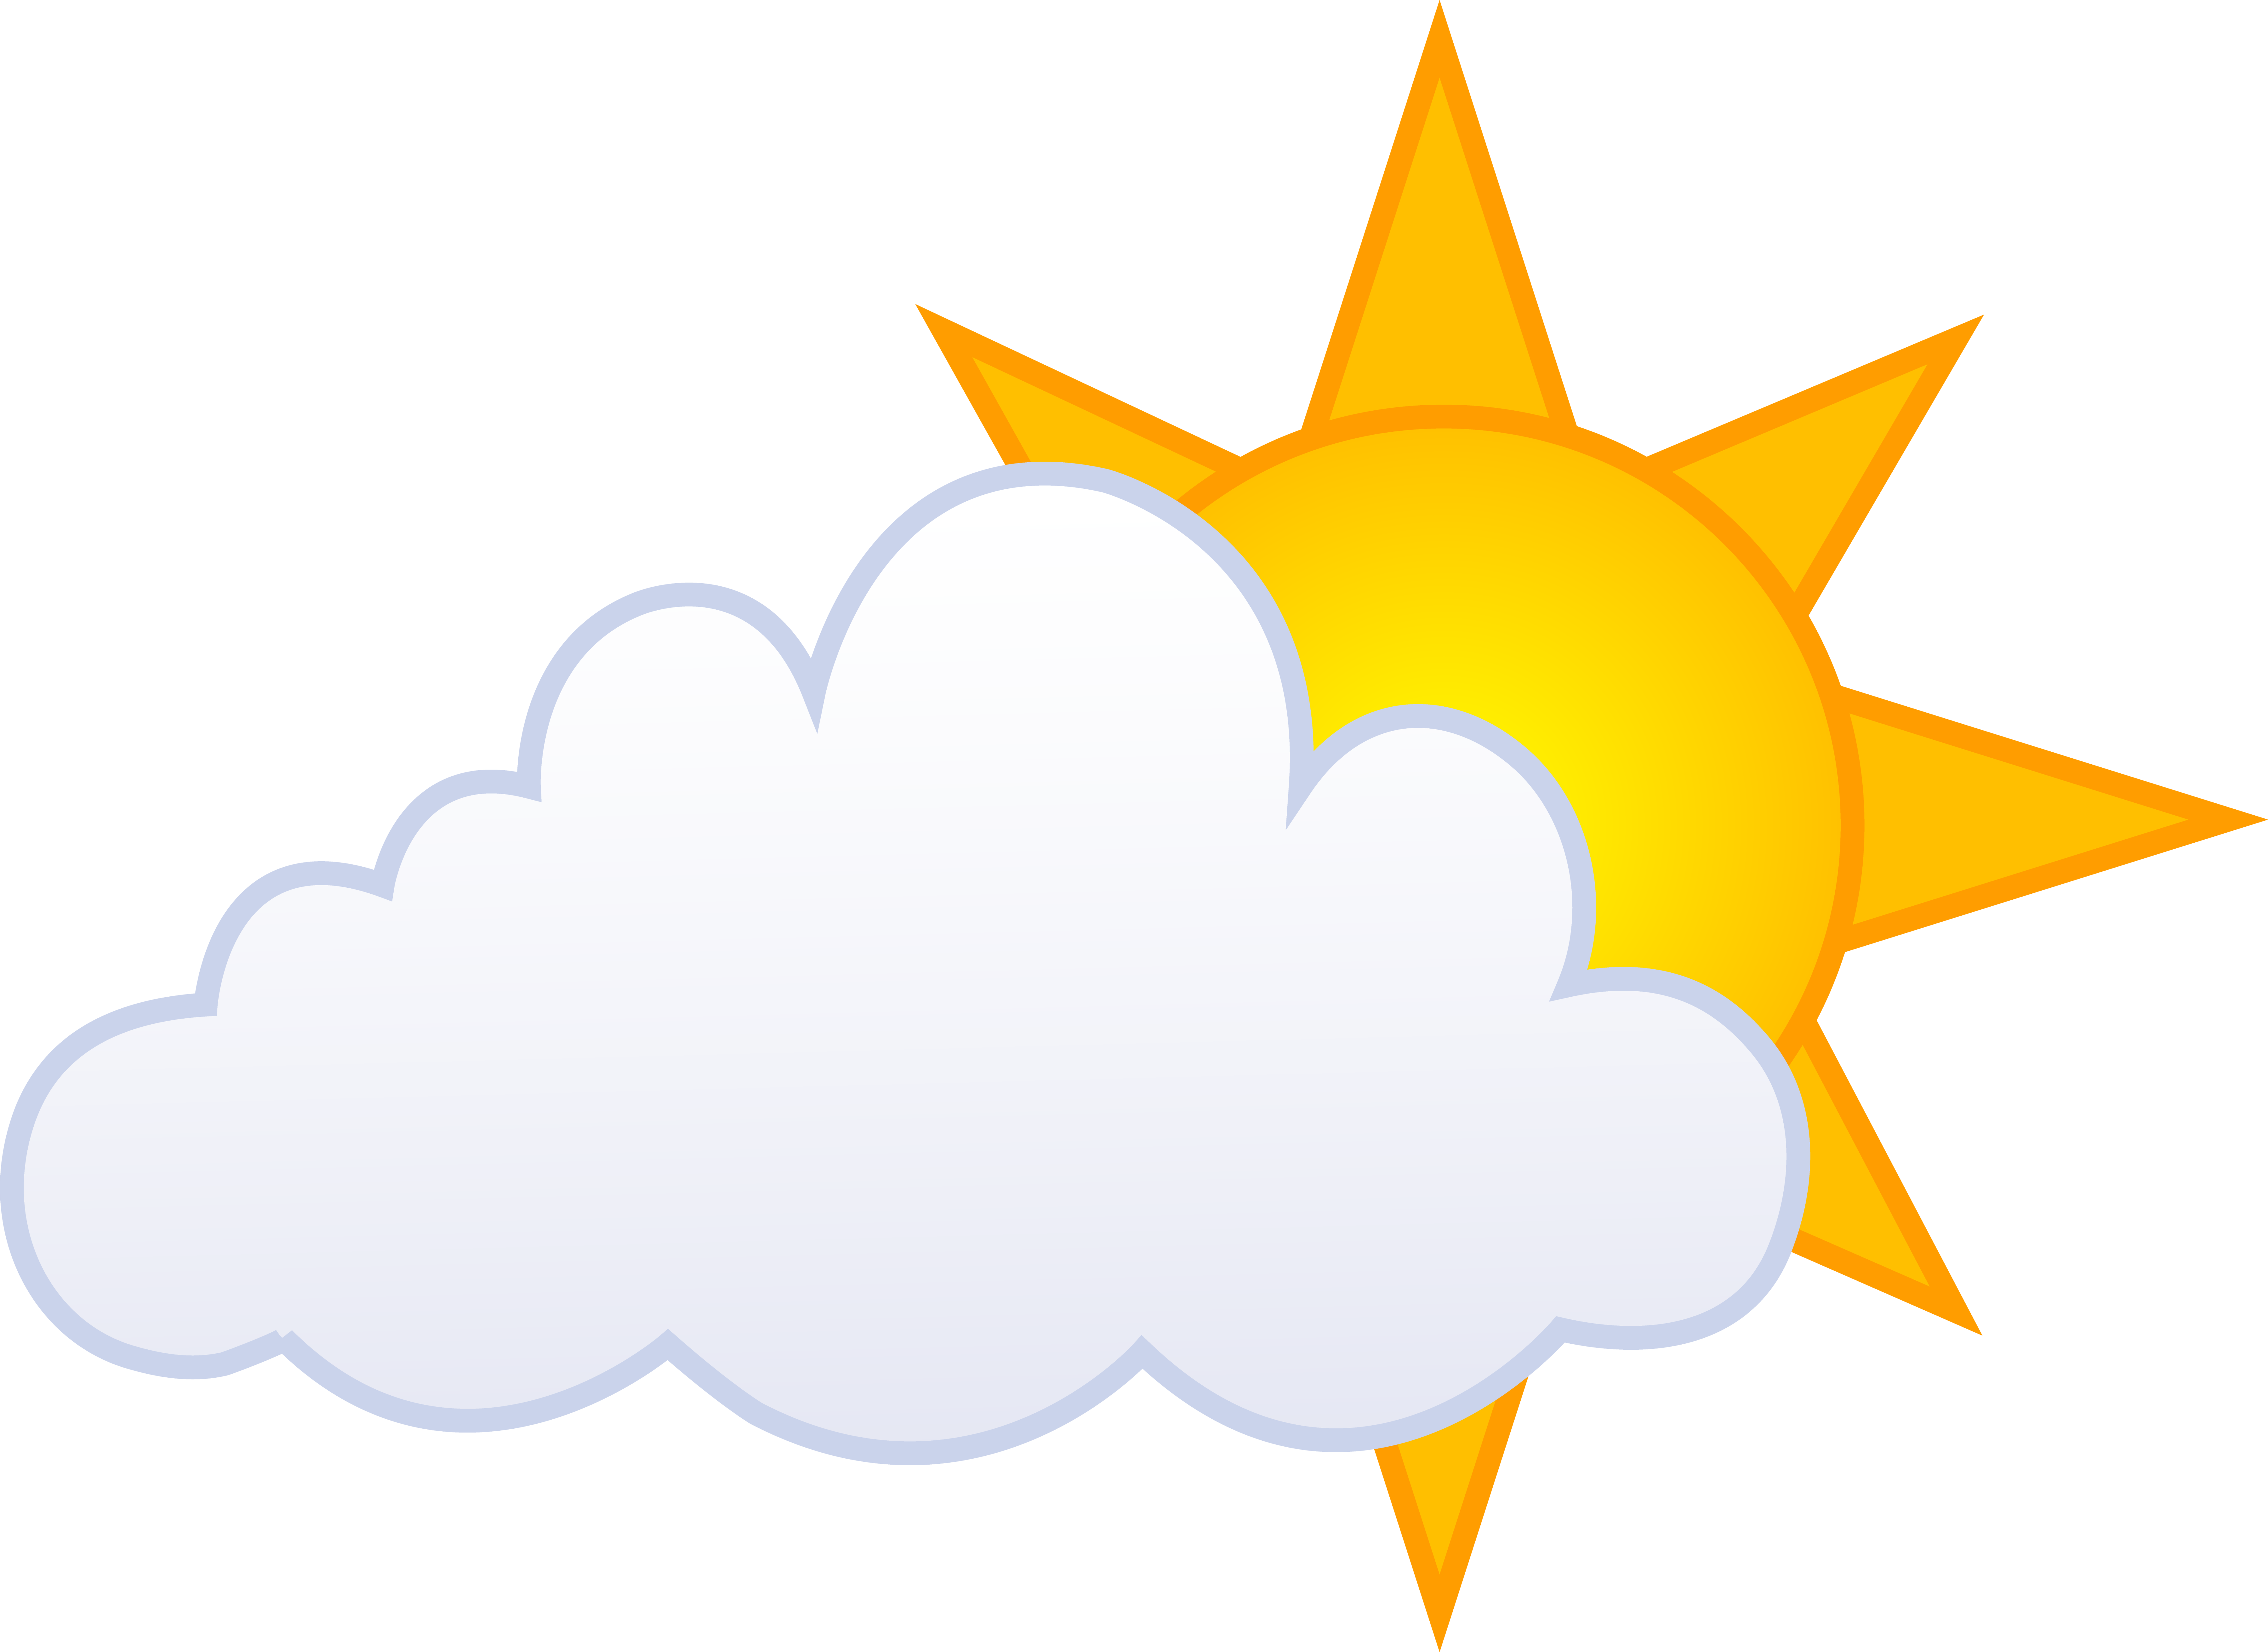 Partly cloudy weather clip art clipart free to use clip art resource